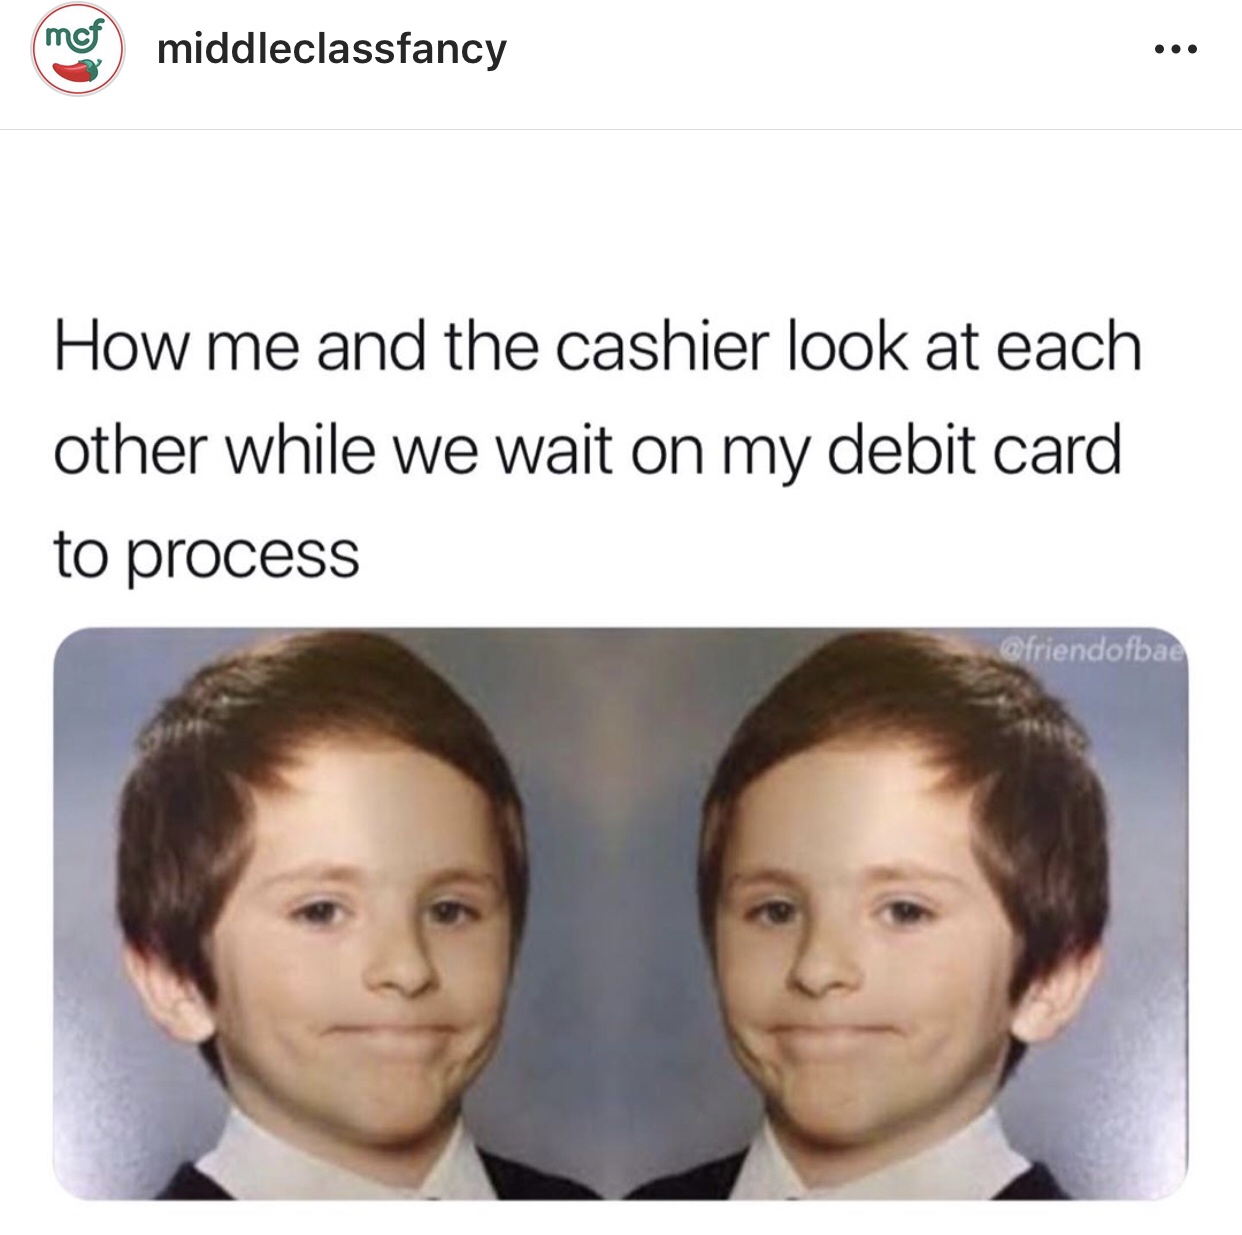 me and the cashier look at each other - mof middleclassfancy How me and the cashier look at each other while we wait on my debit card to process